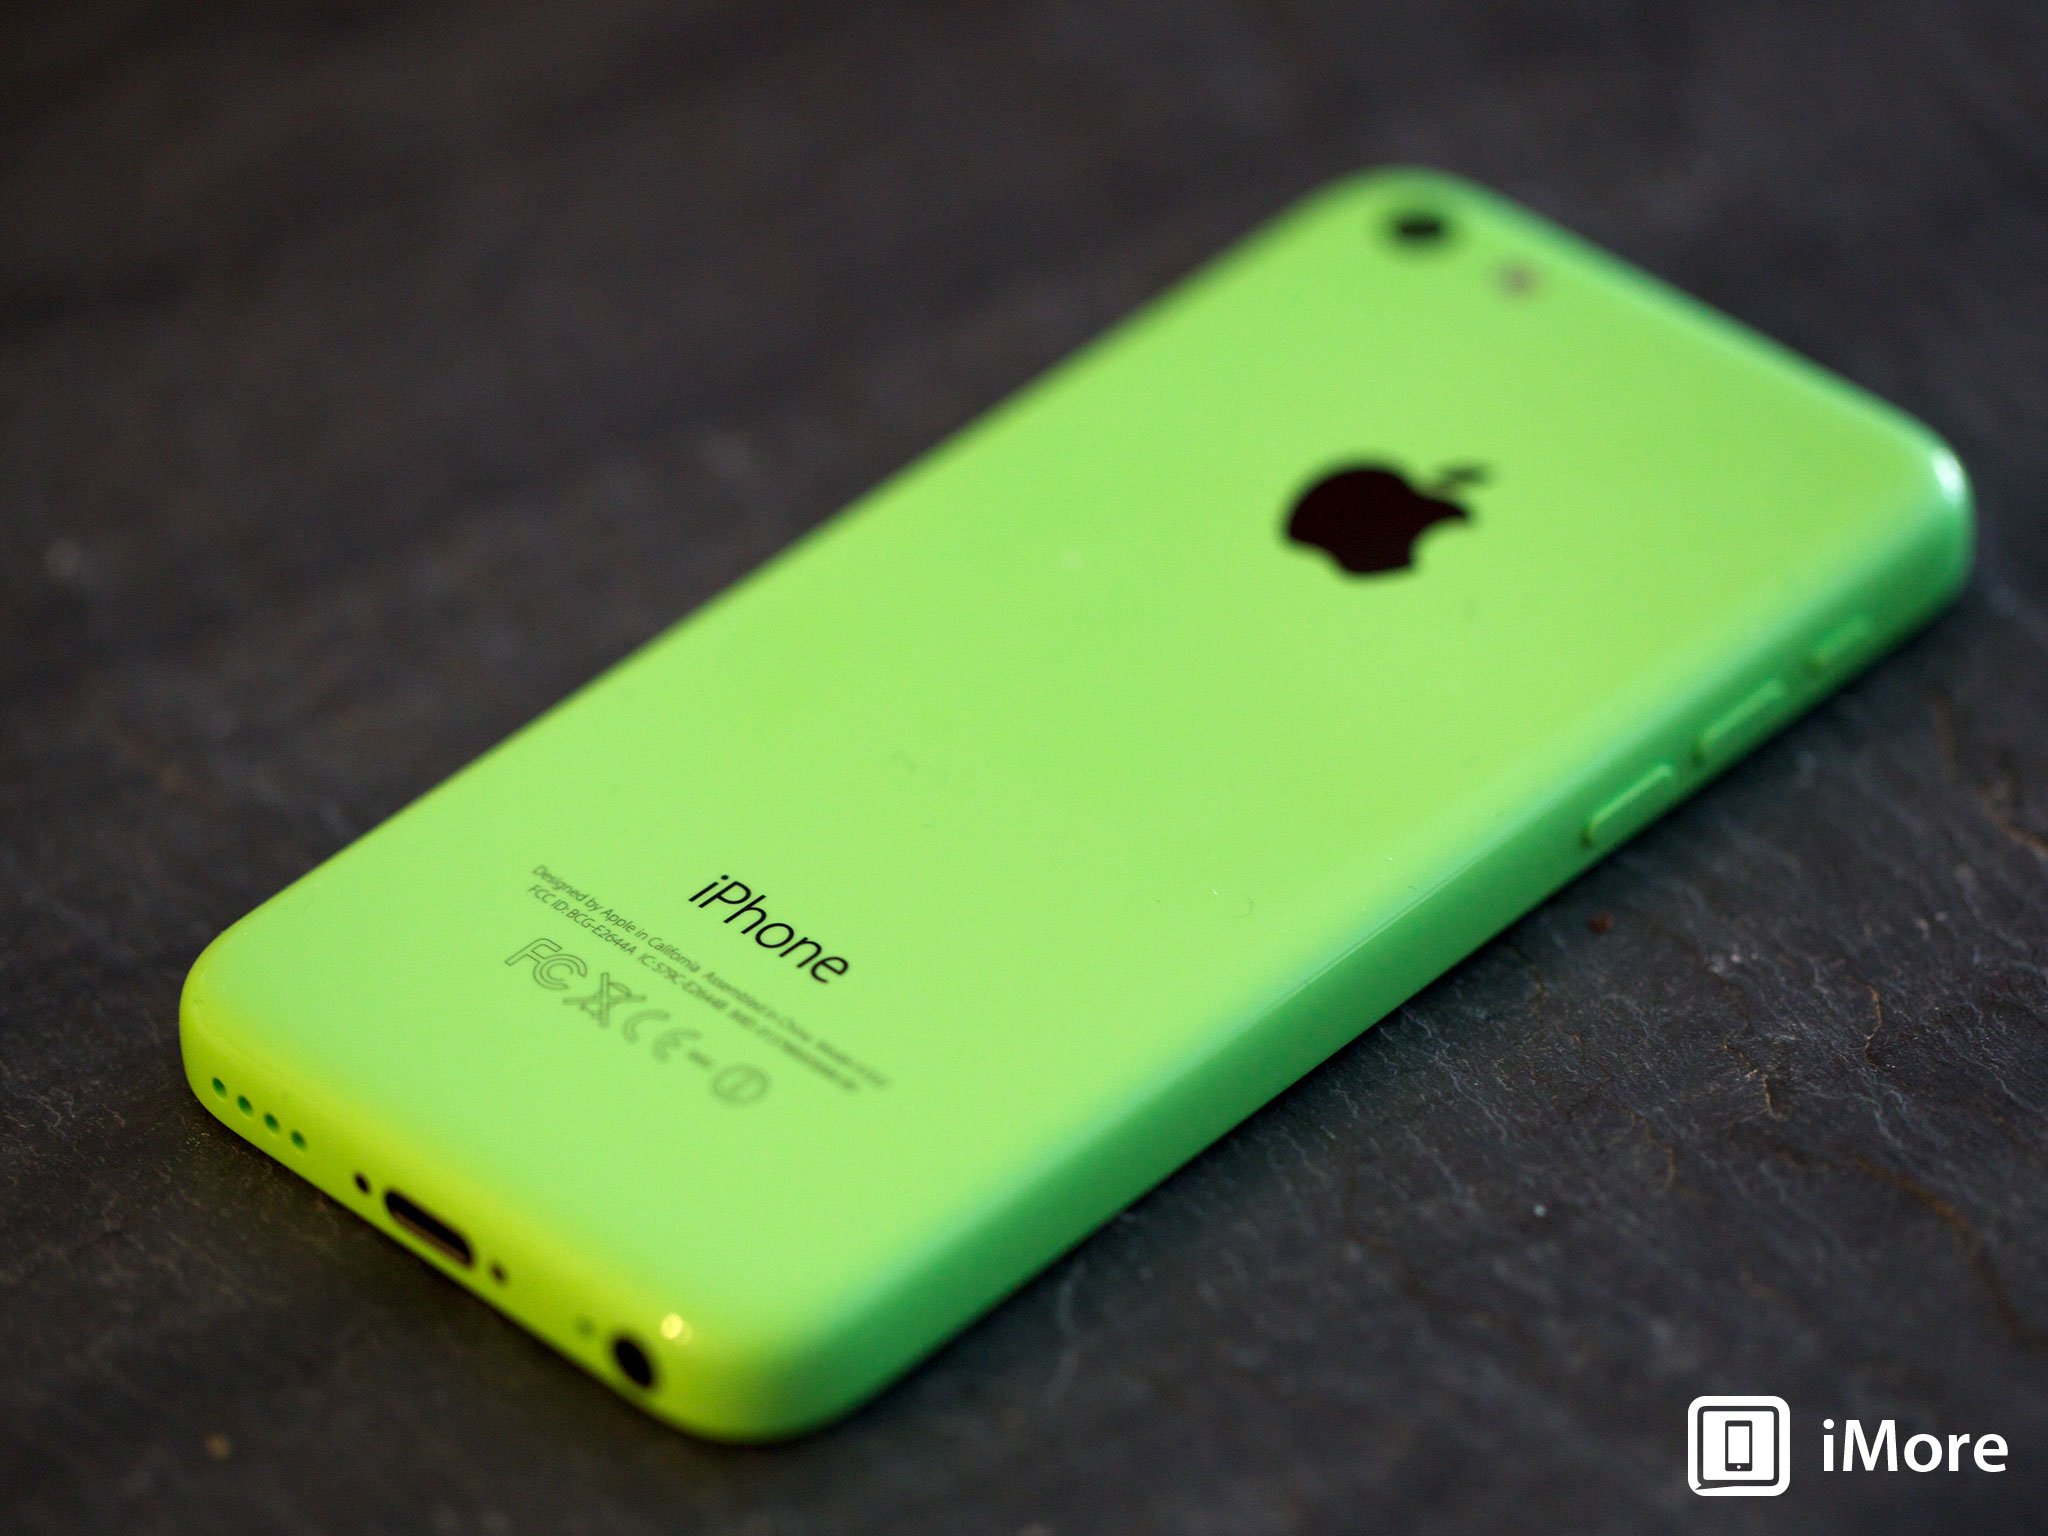 Green iPhone 5c unboxing, hardware tour, macro close-up gallery